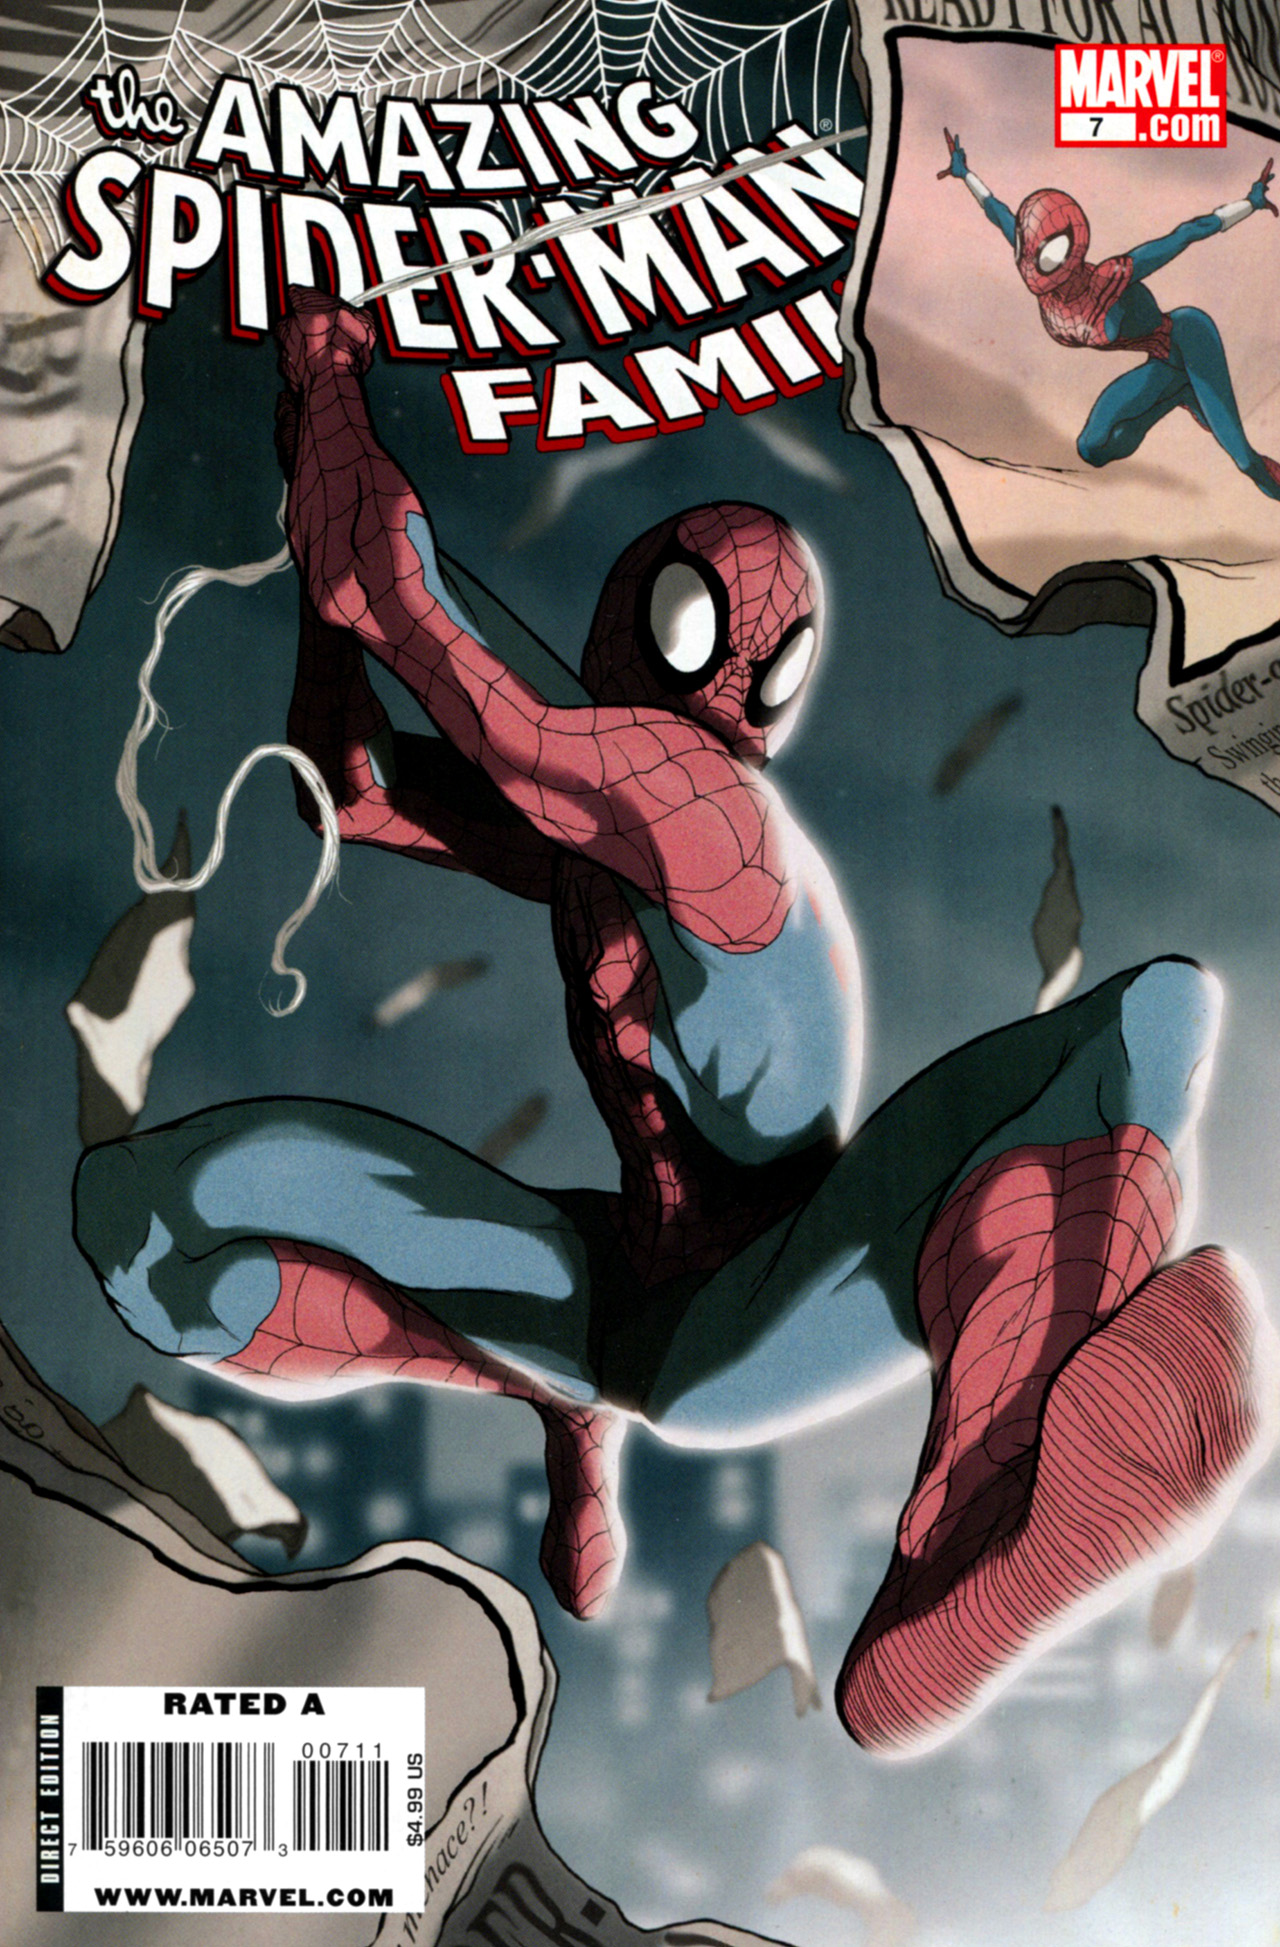 Read online Amazing Spider-Man Family comic -  Issue #7 - 1